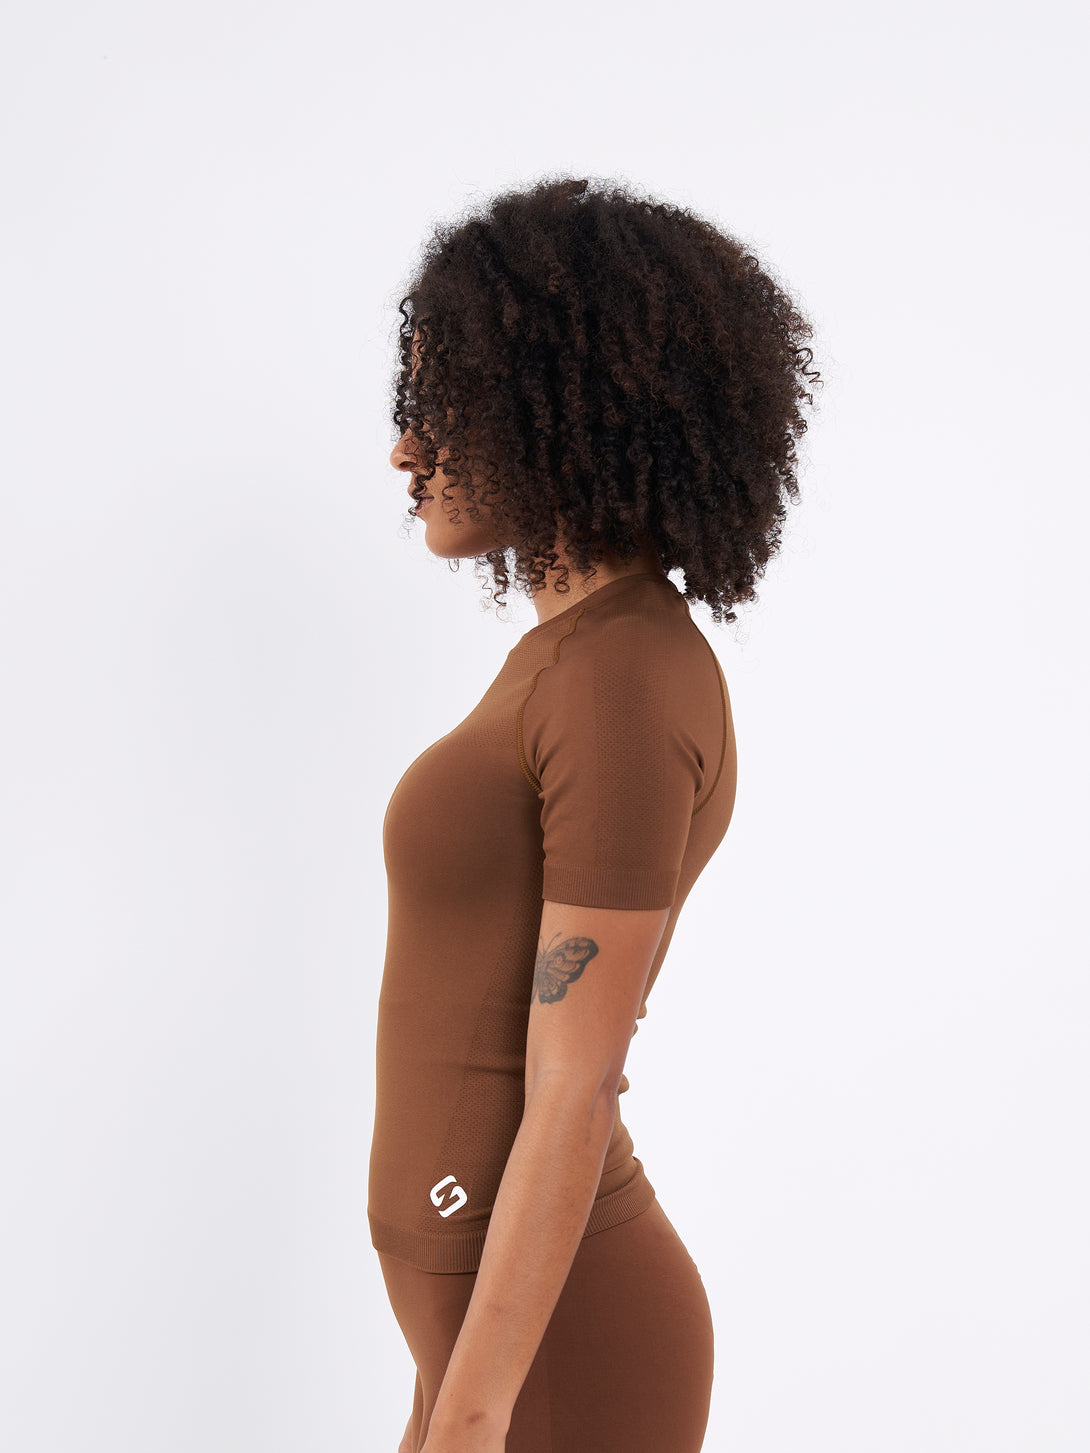 A Women Wearing Toffe Brown Color Zen Confidence Seamless Compressive T-Shirt. Sculpted Silhouette